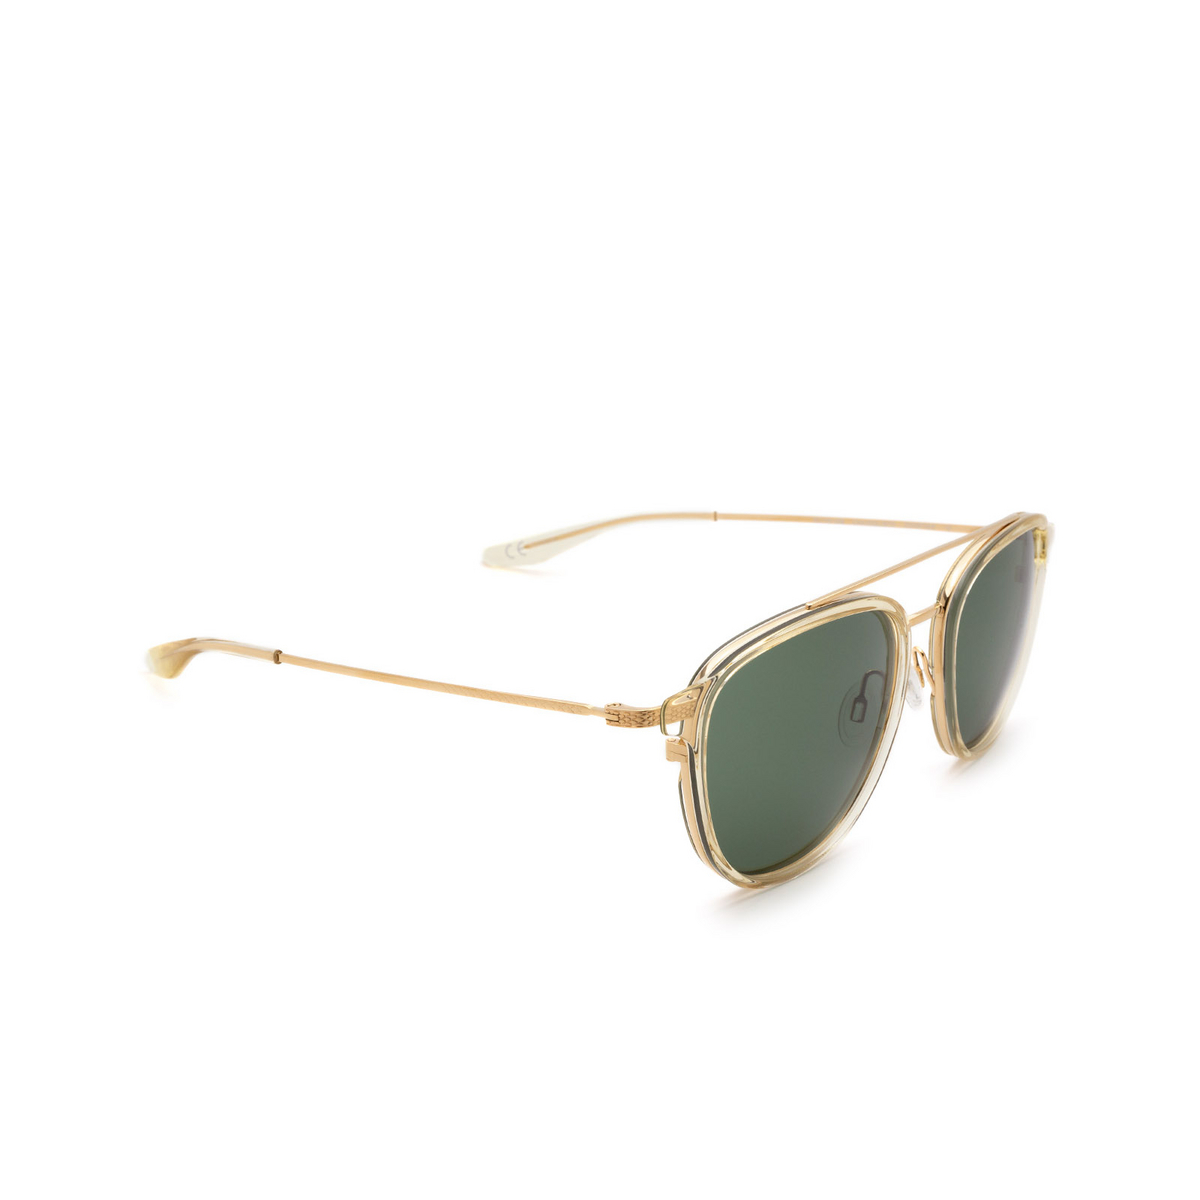 Barton Perreira® Sunglasses: Courtier BP0014 color Champagne 0KP - front view.